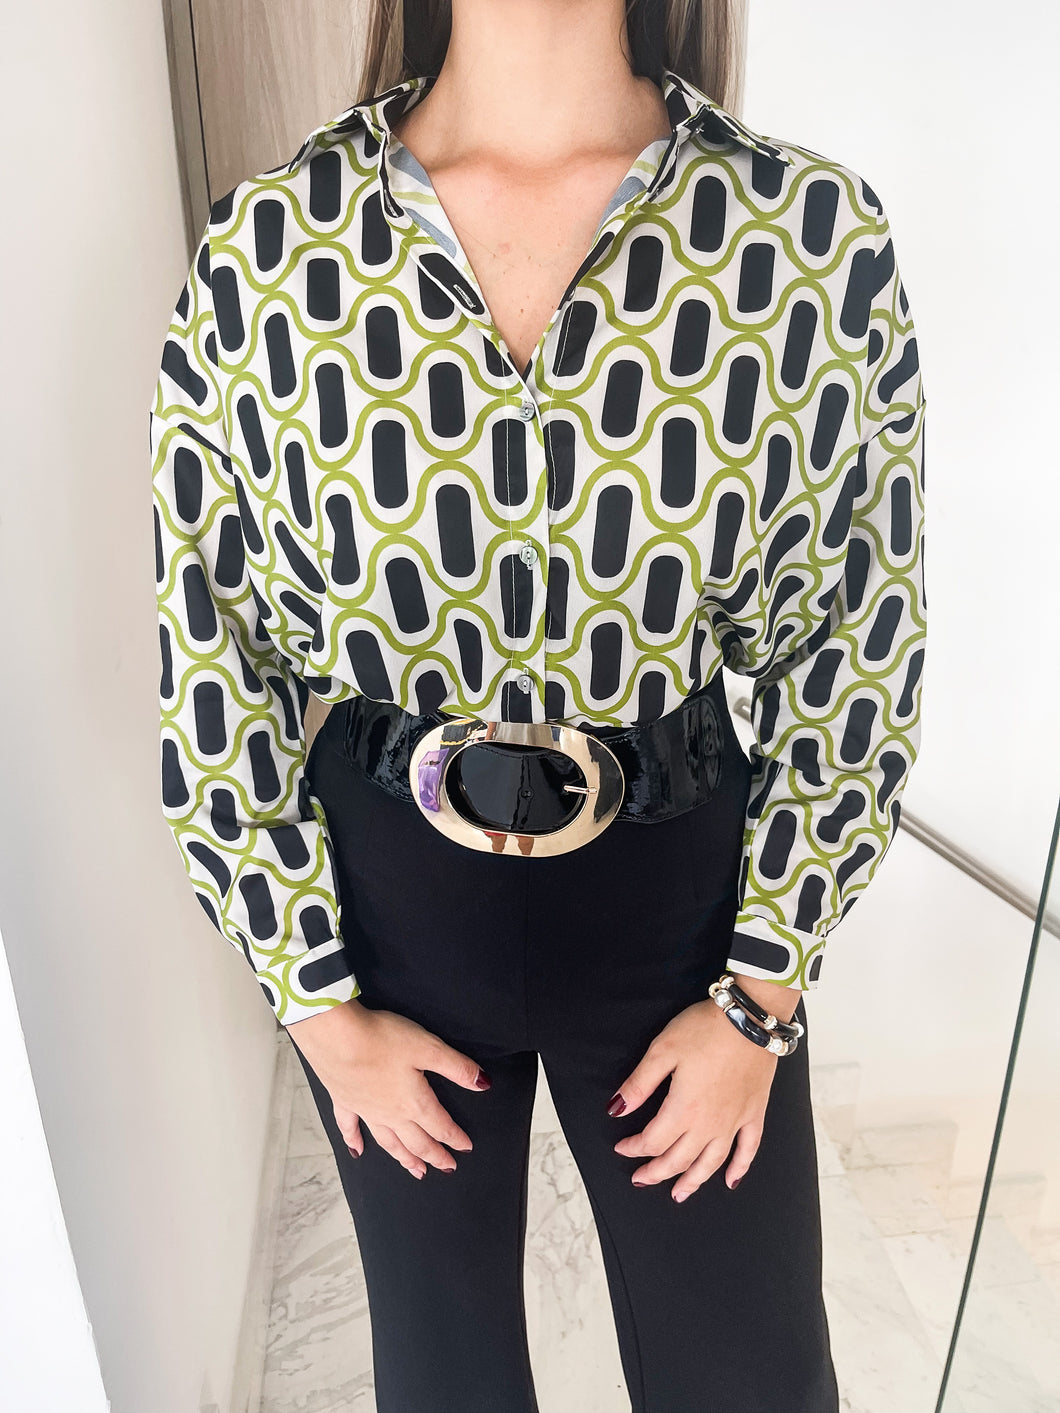 GROOVY GREEN PRINT LONG SLEEVE BUTTONED TOP